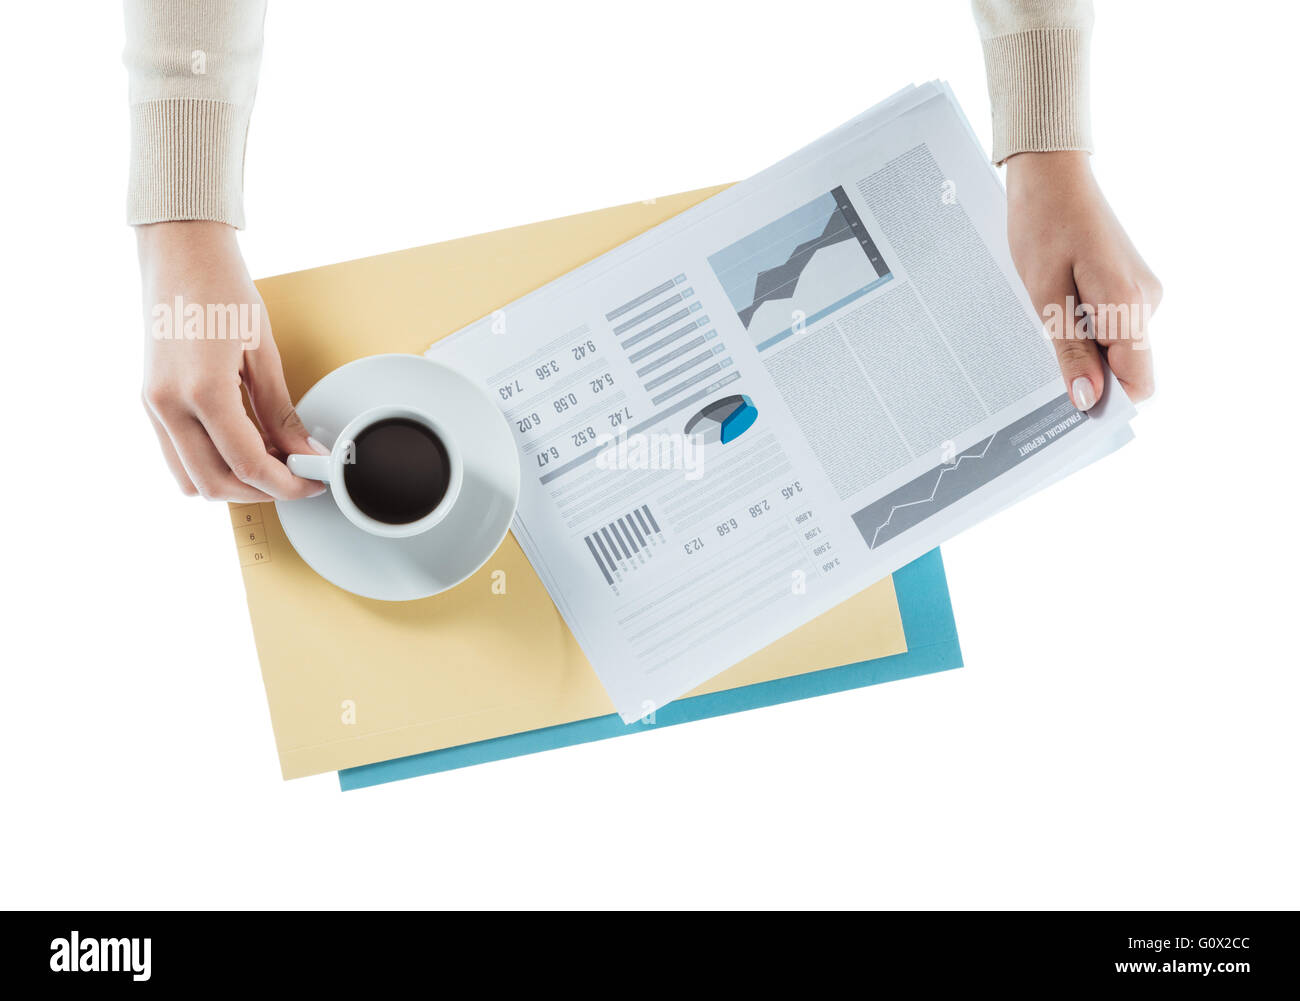 Business woman having a coffee at office desk while reading a financial report, hands close up Stock Photo